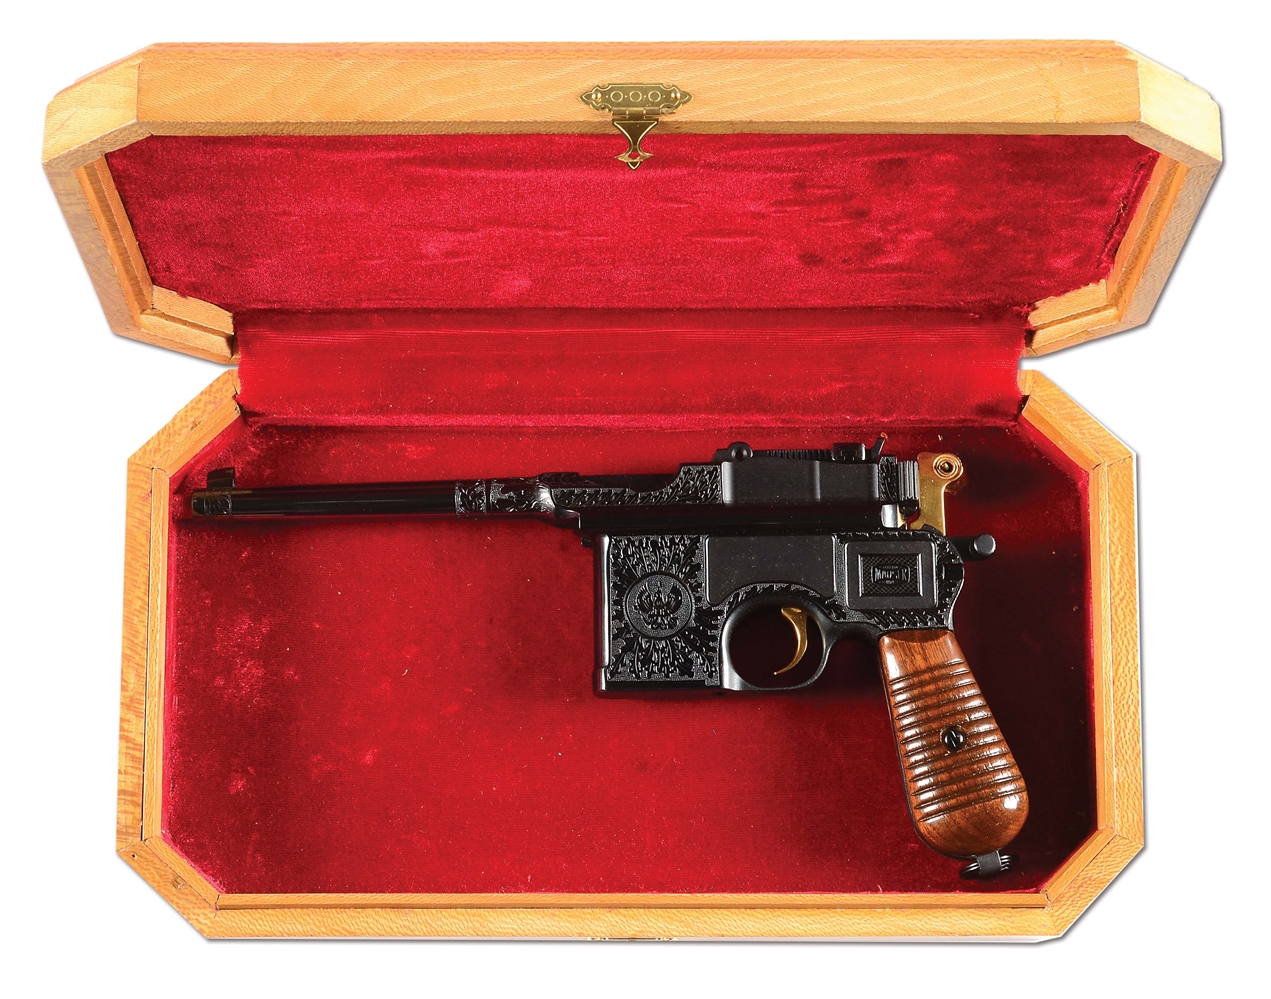 (C) AMERICAN HISTORICAL FOUNDATION MAUSER C96 GENERAL OFFICERS EDITION SEMI-AUTOMATIC PISTOL WITH CUSTOM DISPLAY CASE.